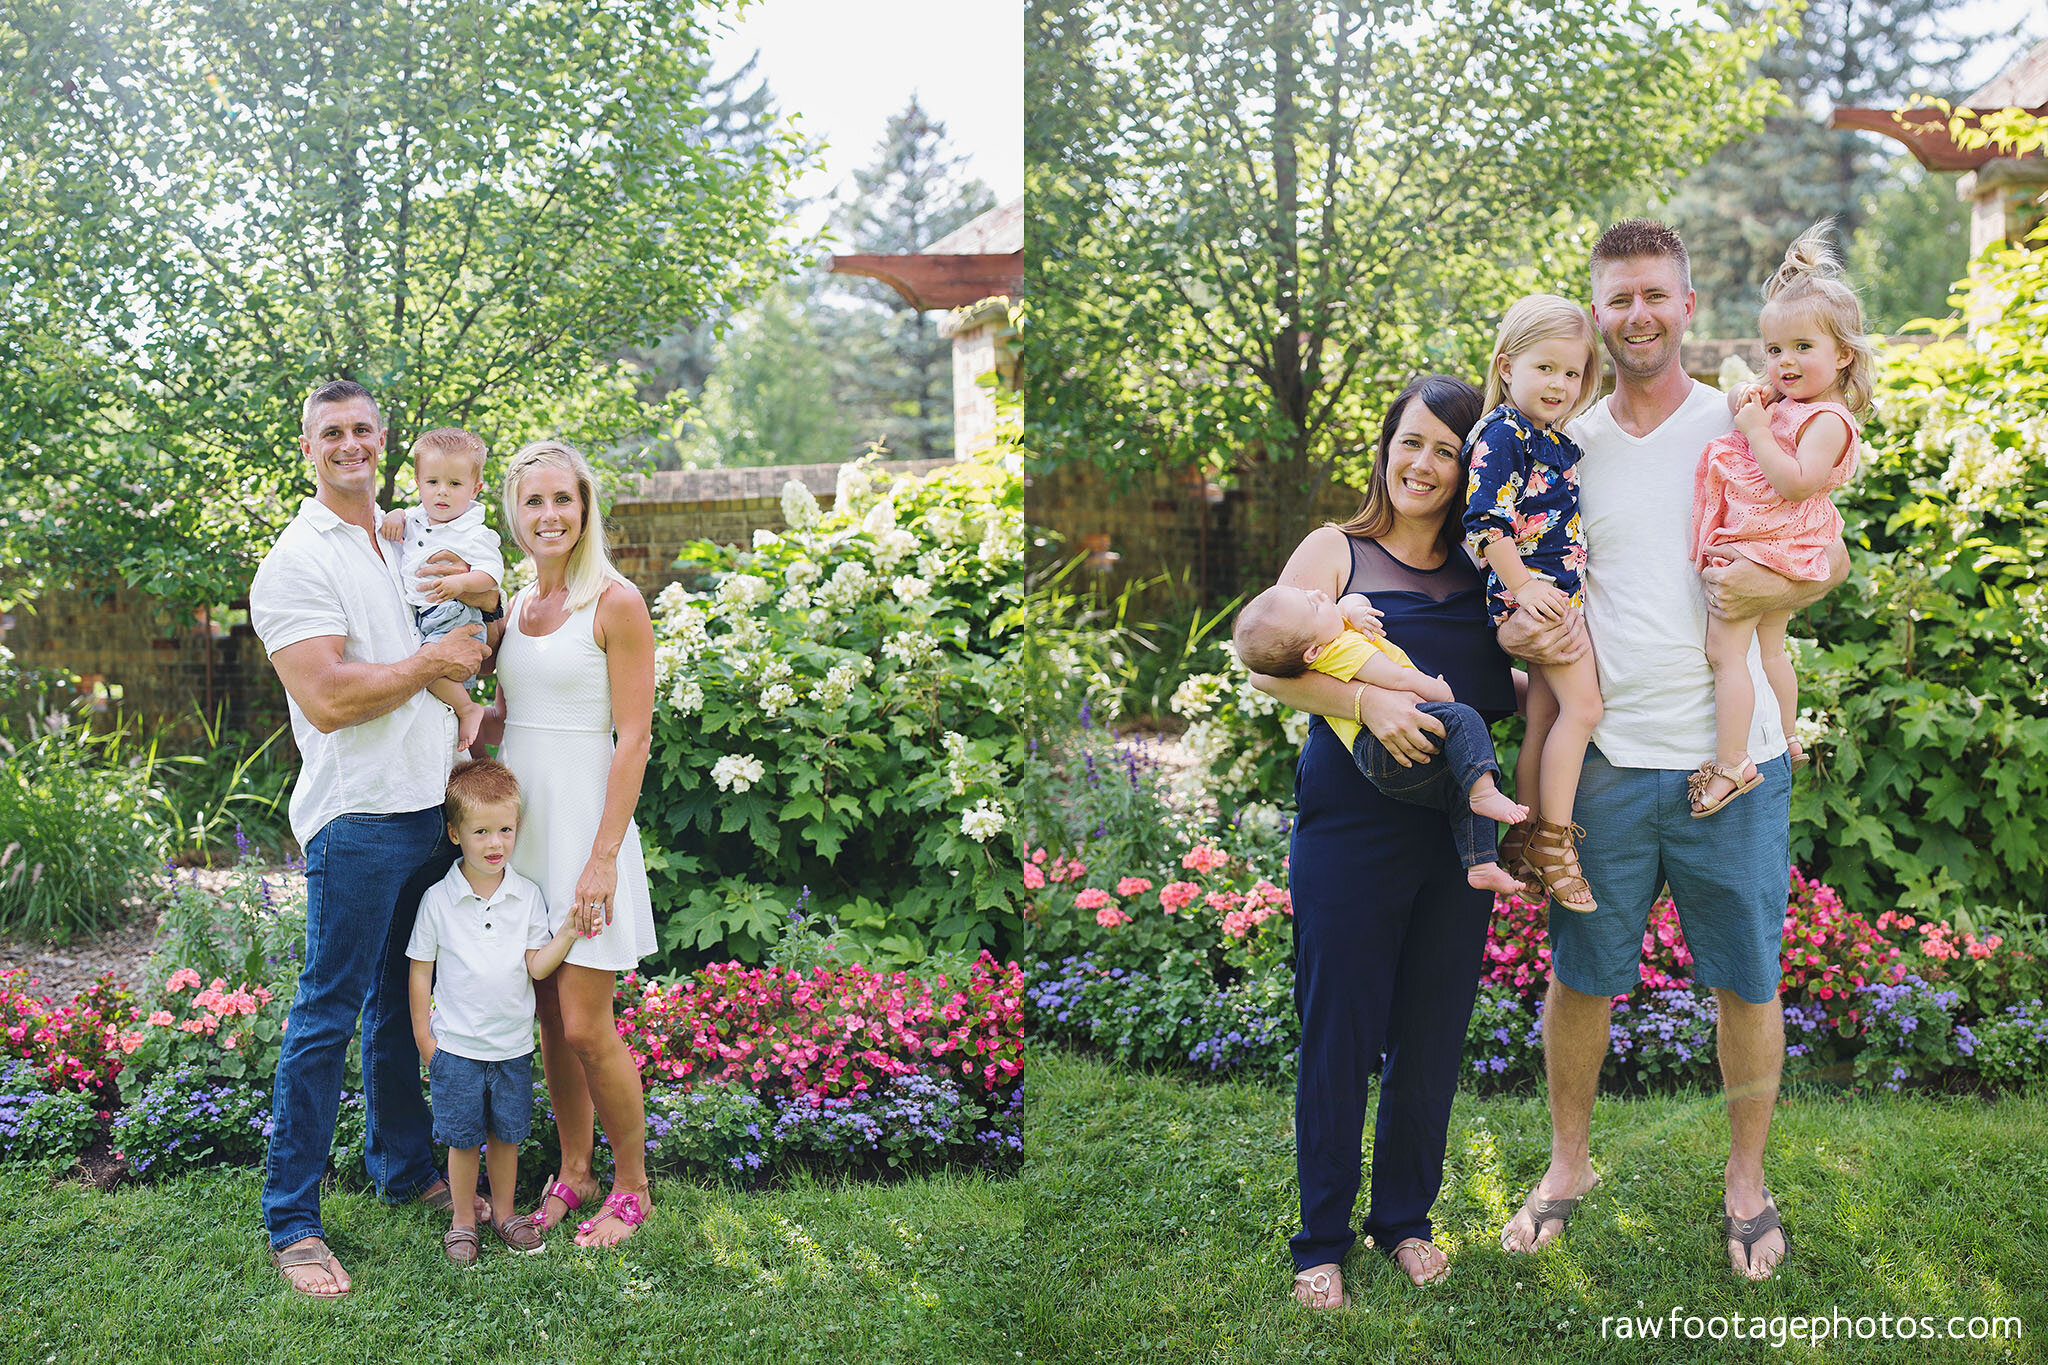 london_ontario_family_photographer-extended_family_session-grandparents-cousins-backyard_session-civic_gardens-raw_footage_photography-037.jpg